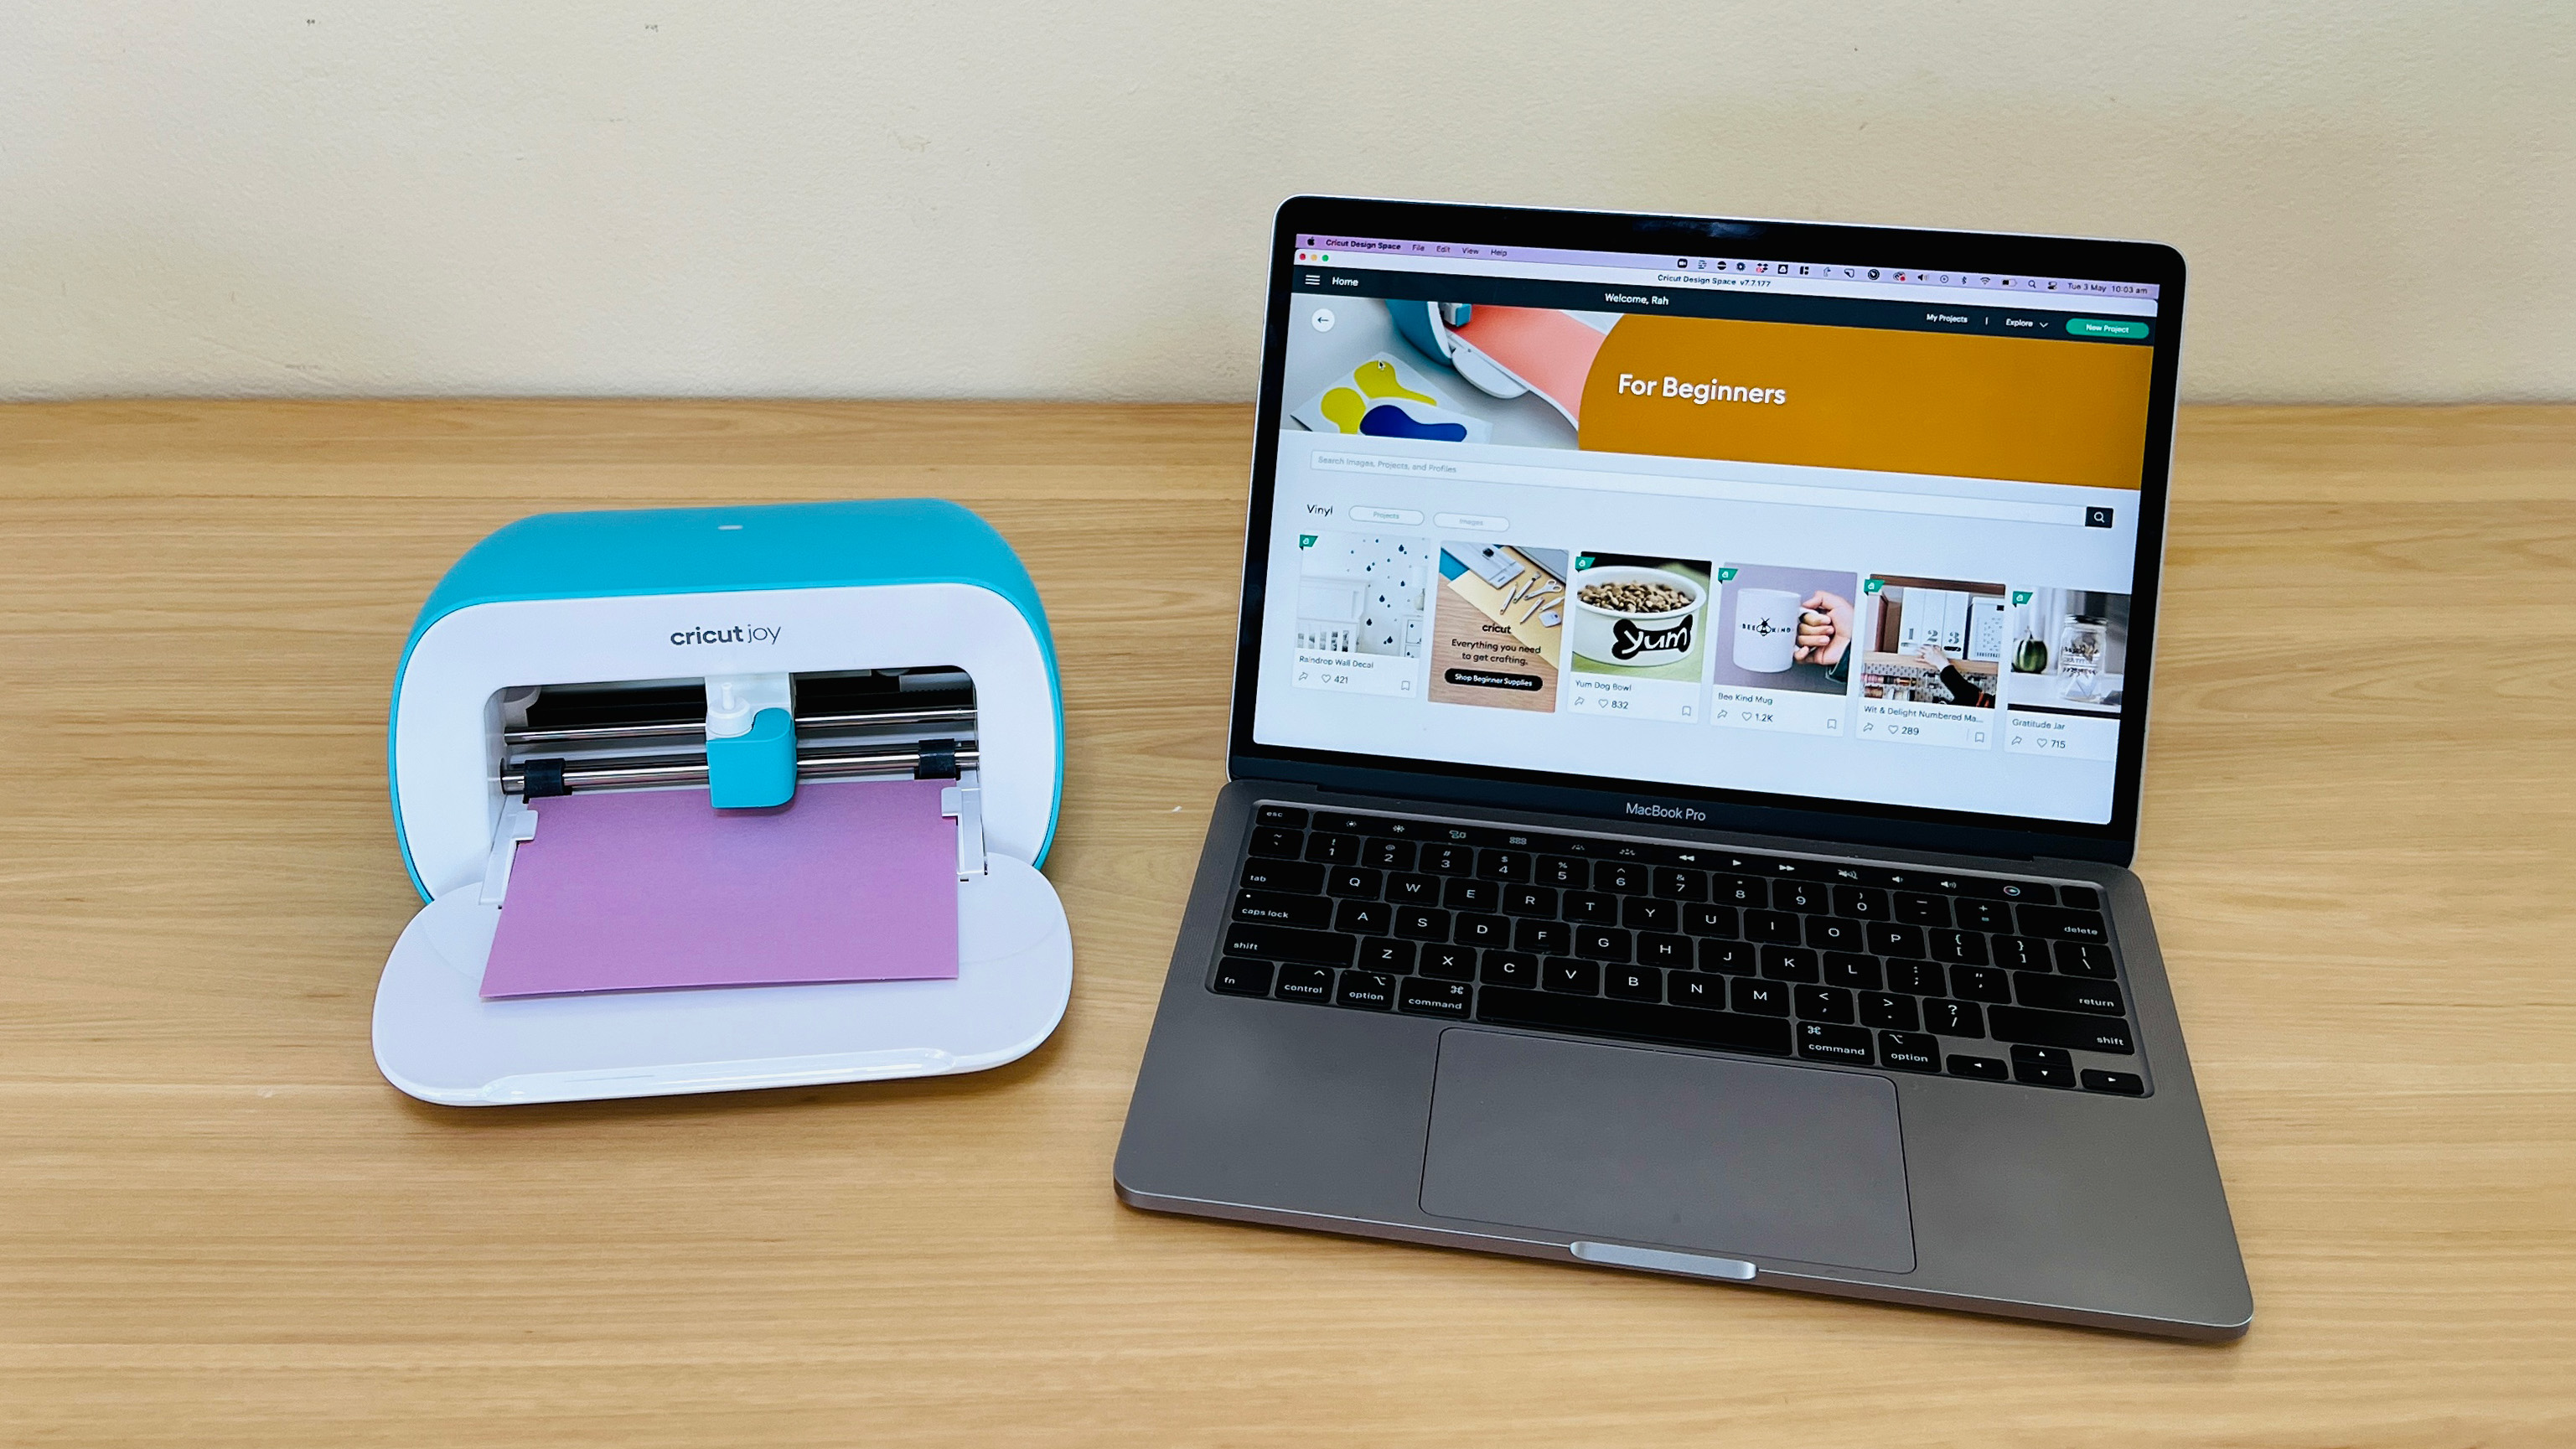 Cricut Joy Reviews You'll Want to Read - arinsolangeathome